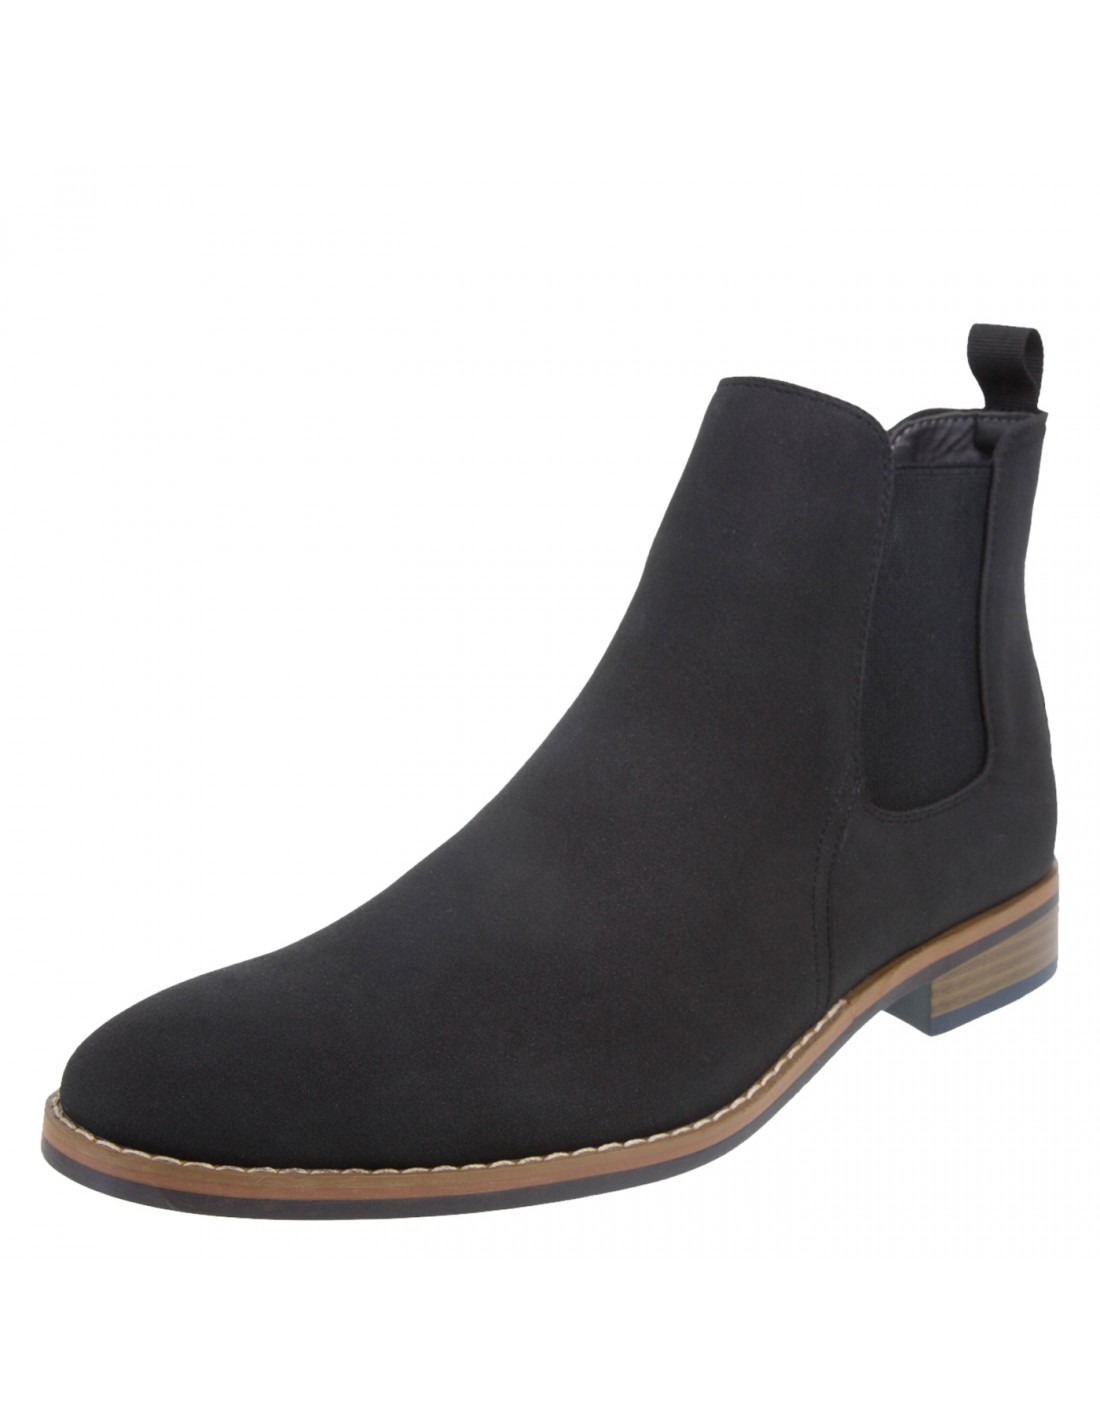 Men's Thane Chelsea Boots | Payless